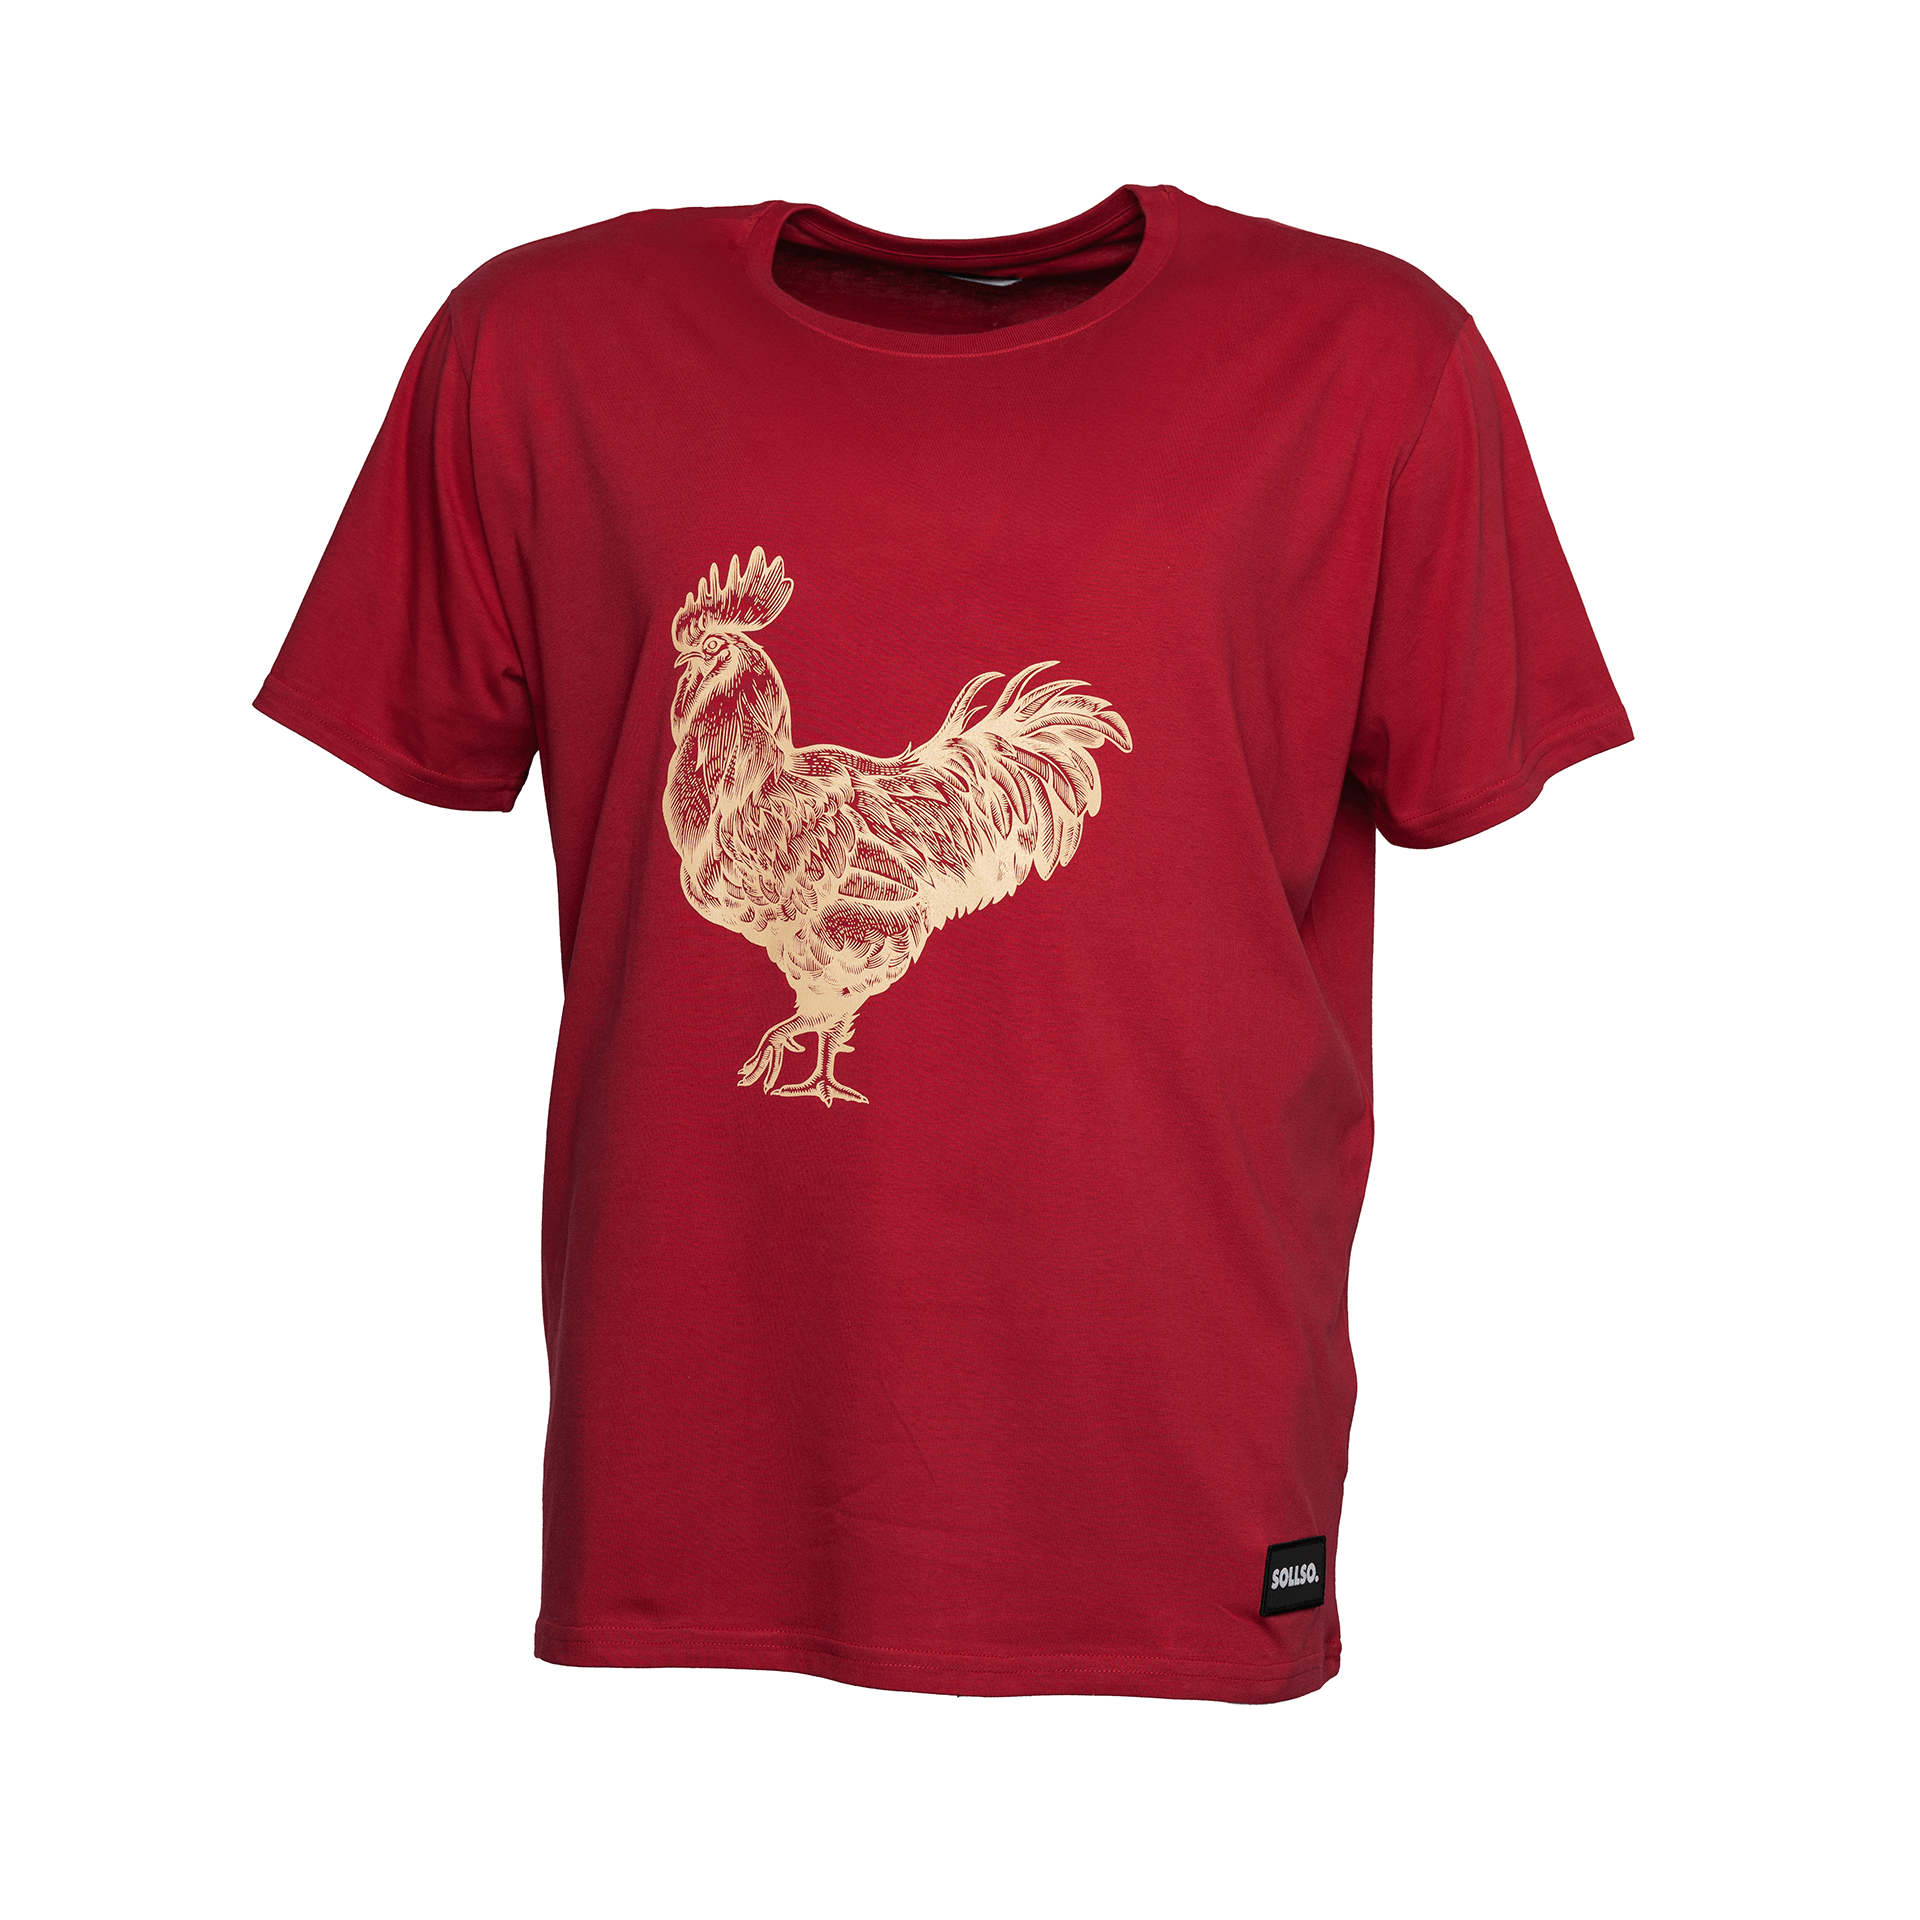 SOLLSO. T-Shirt "Rooster", Farbe Ginger Red, Größe L